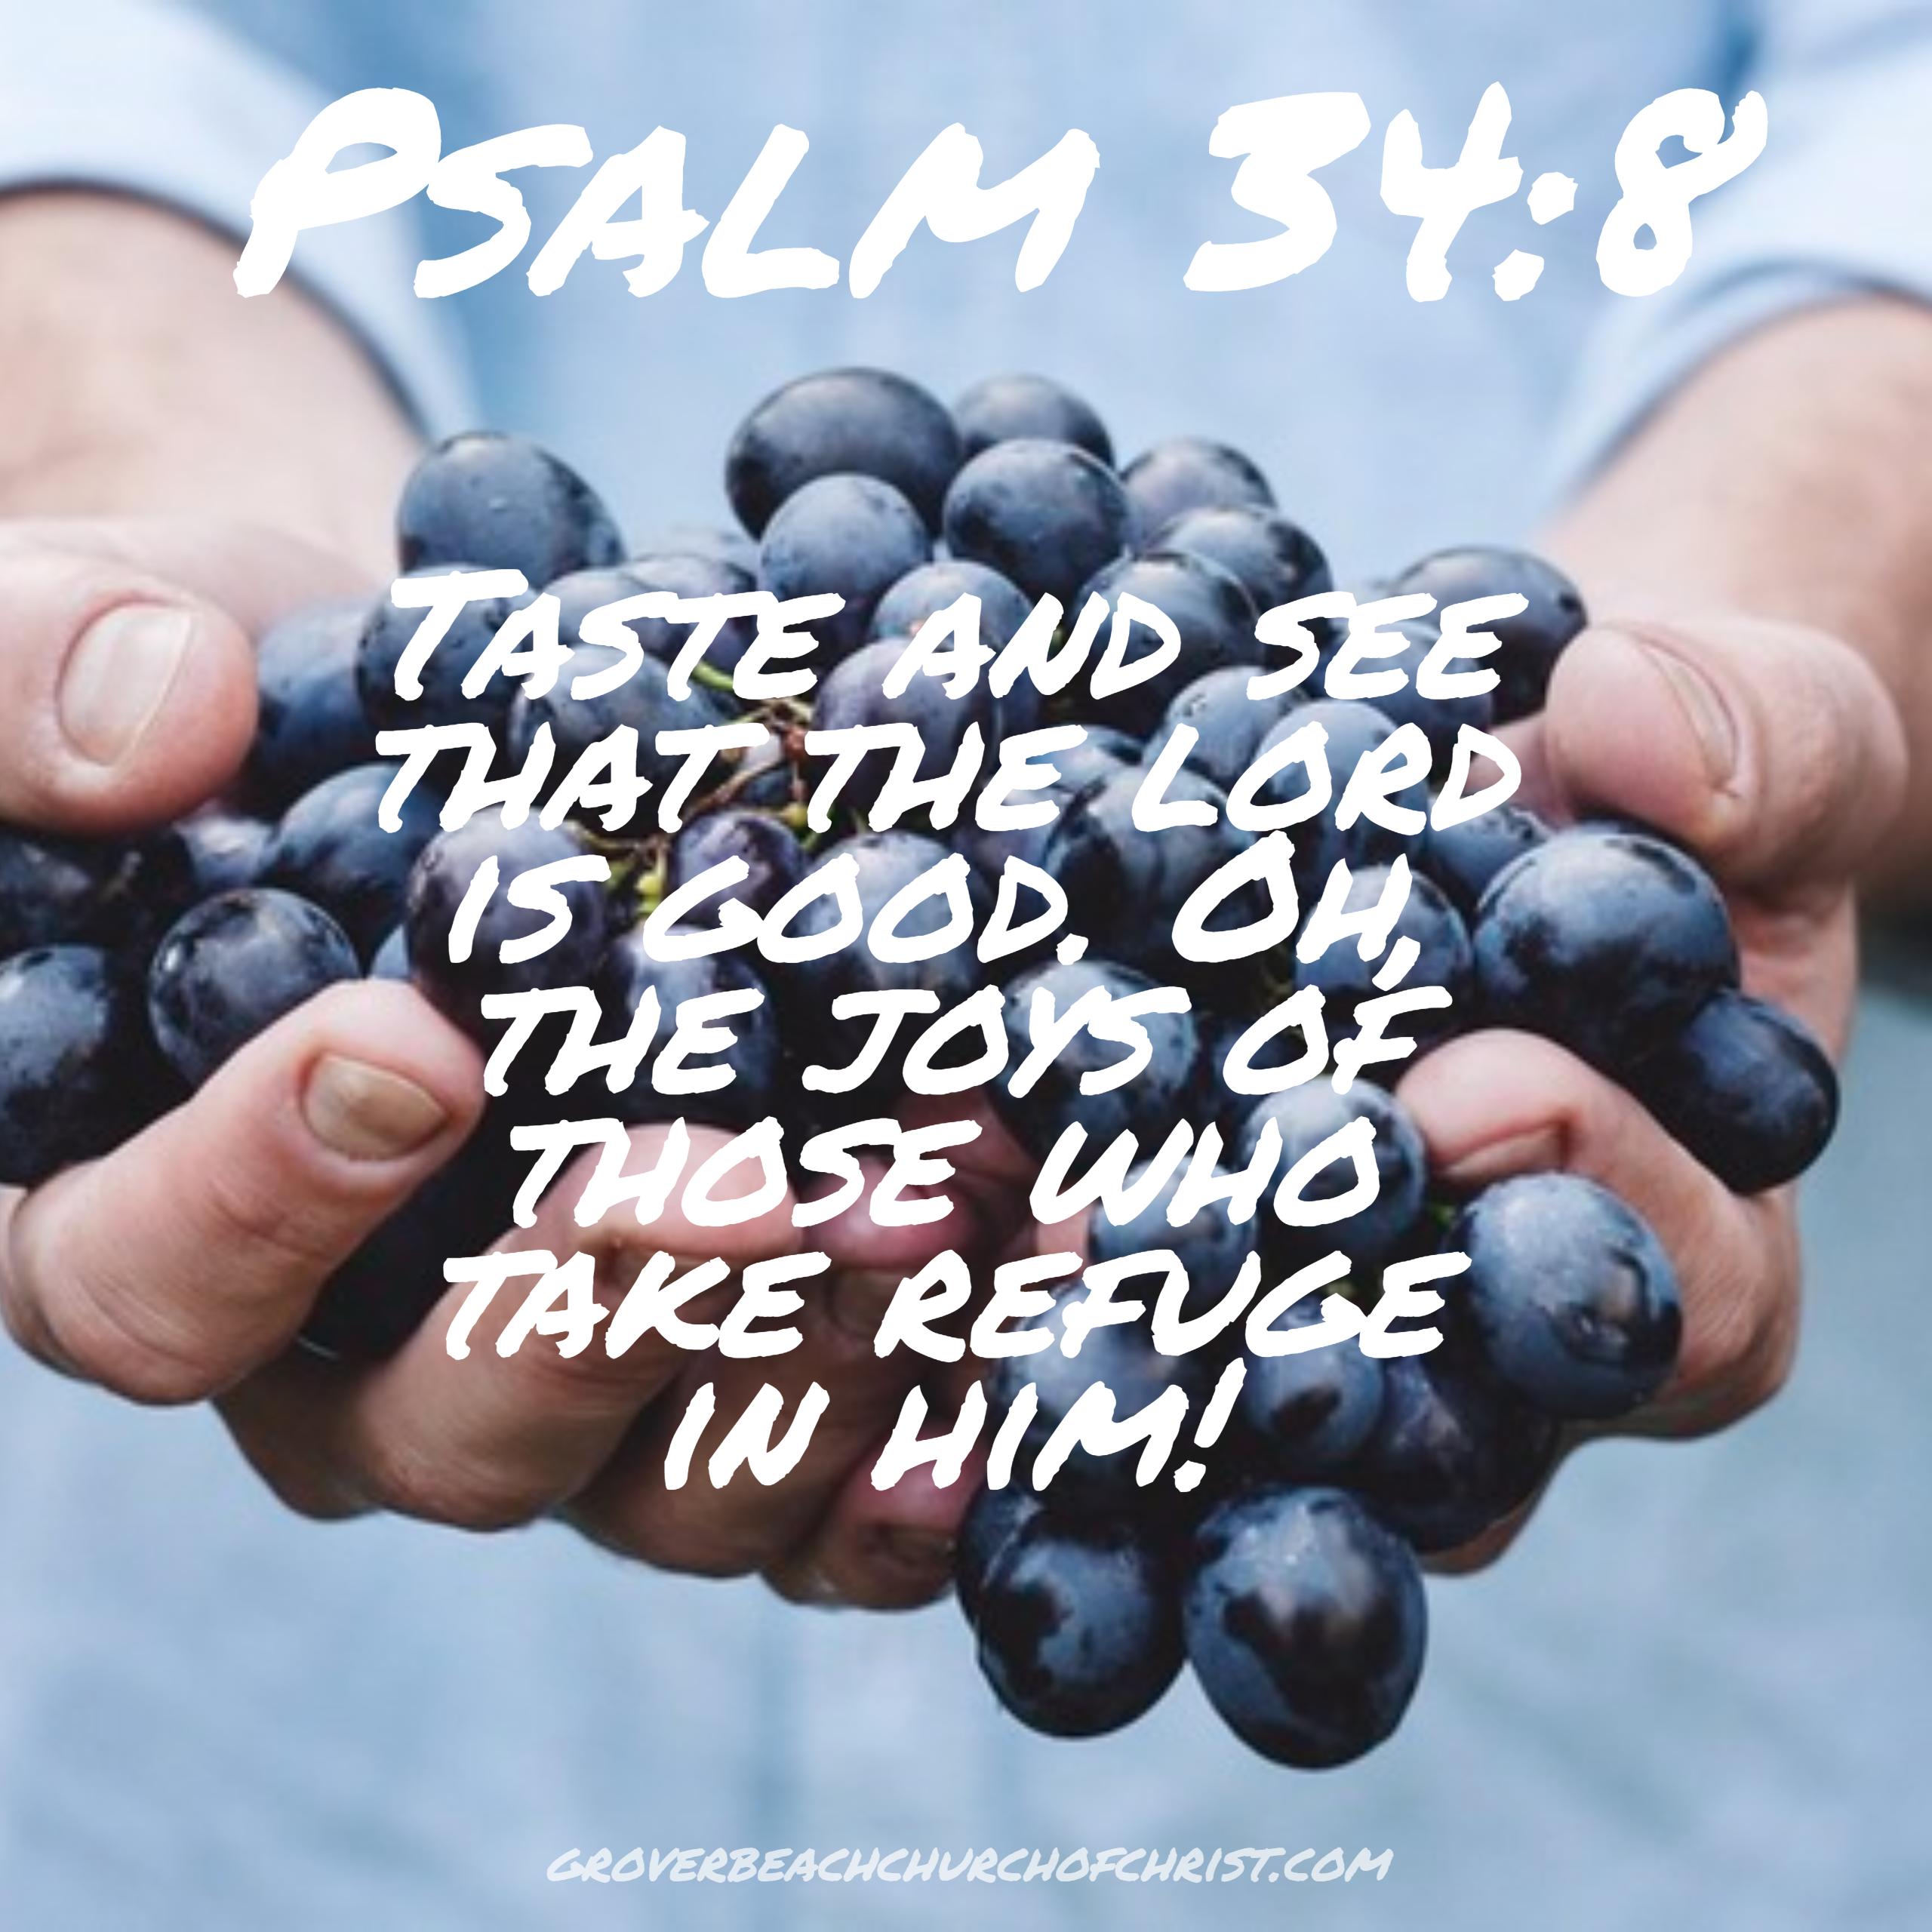 Psalm 34:8 Taste and see